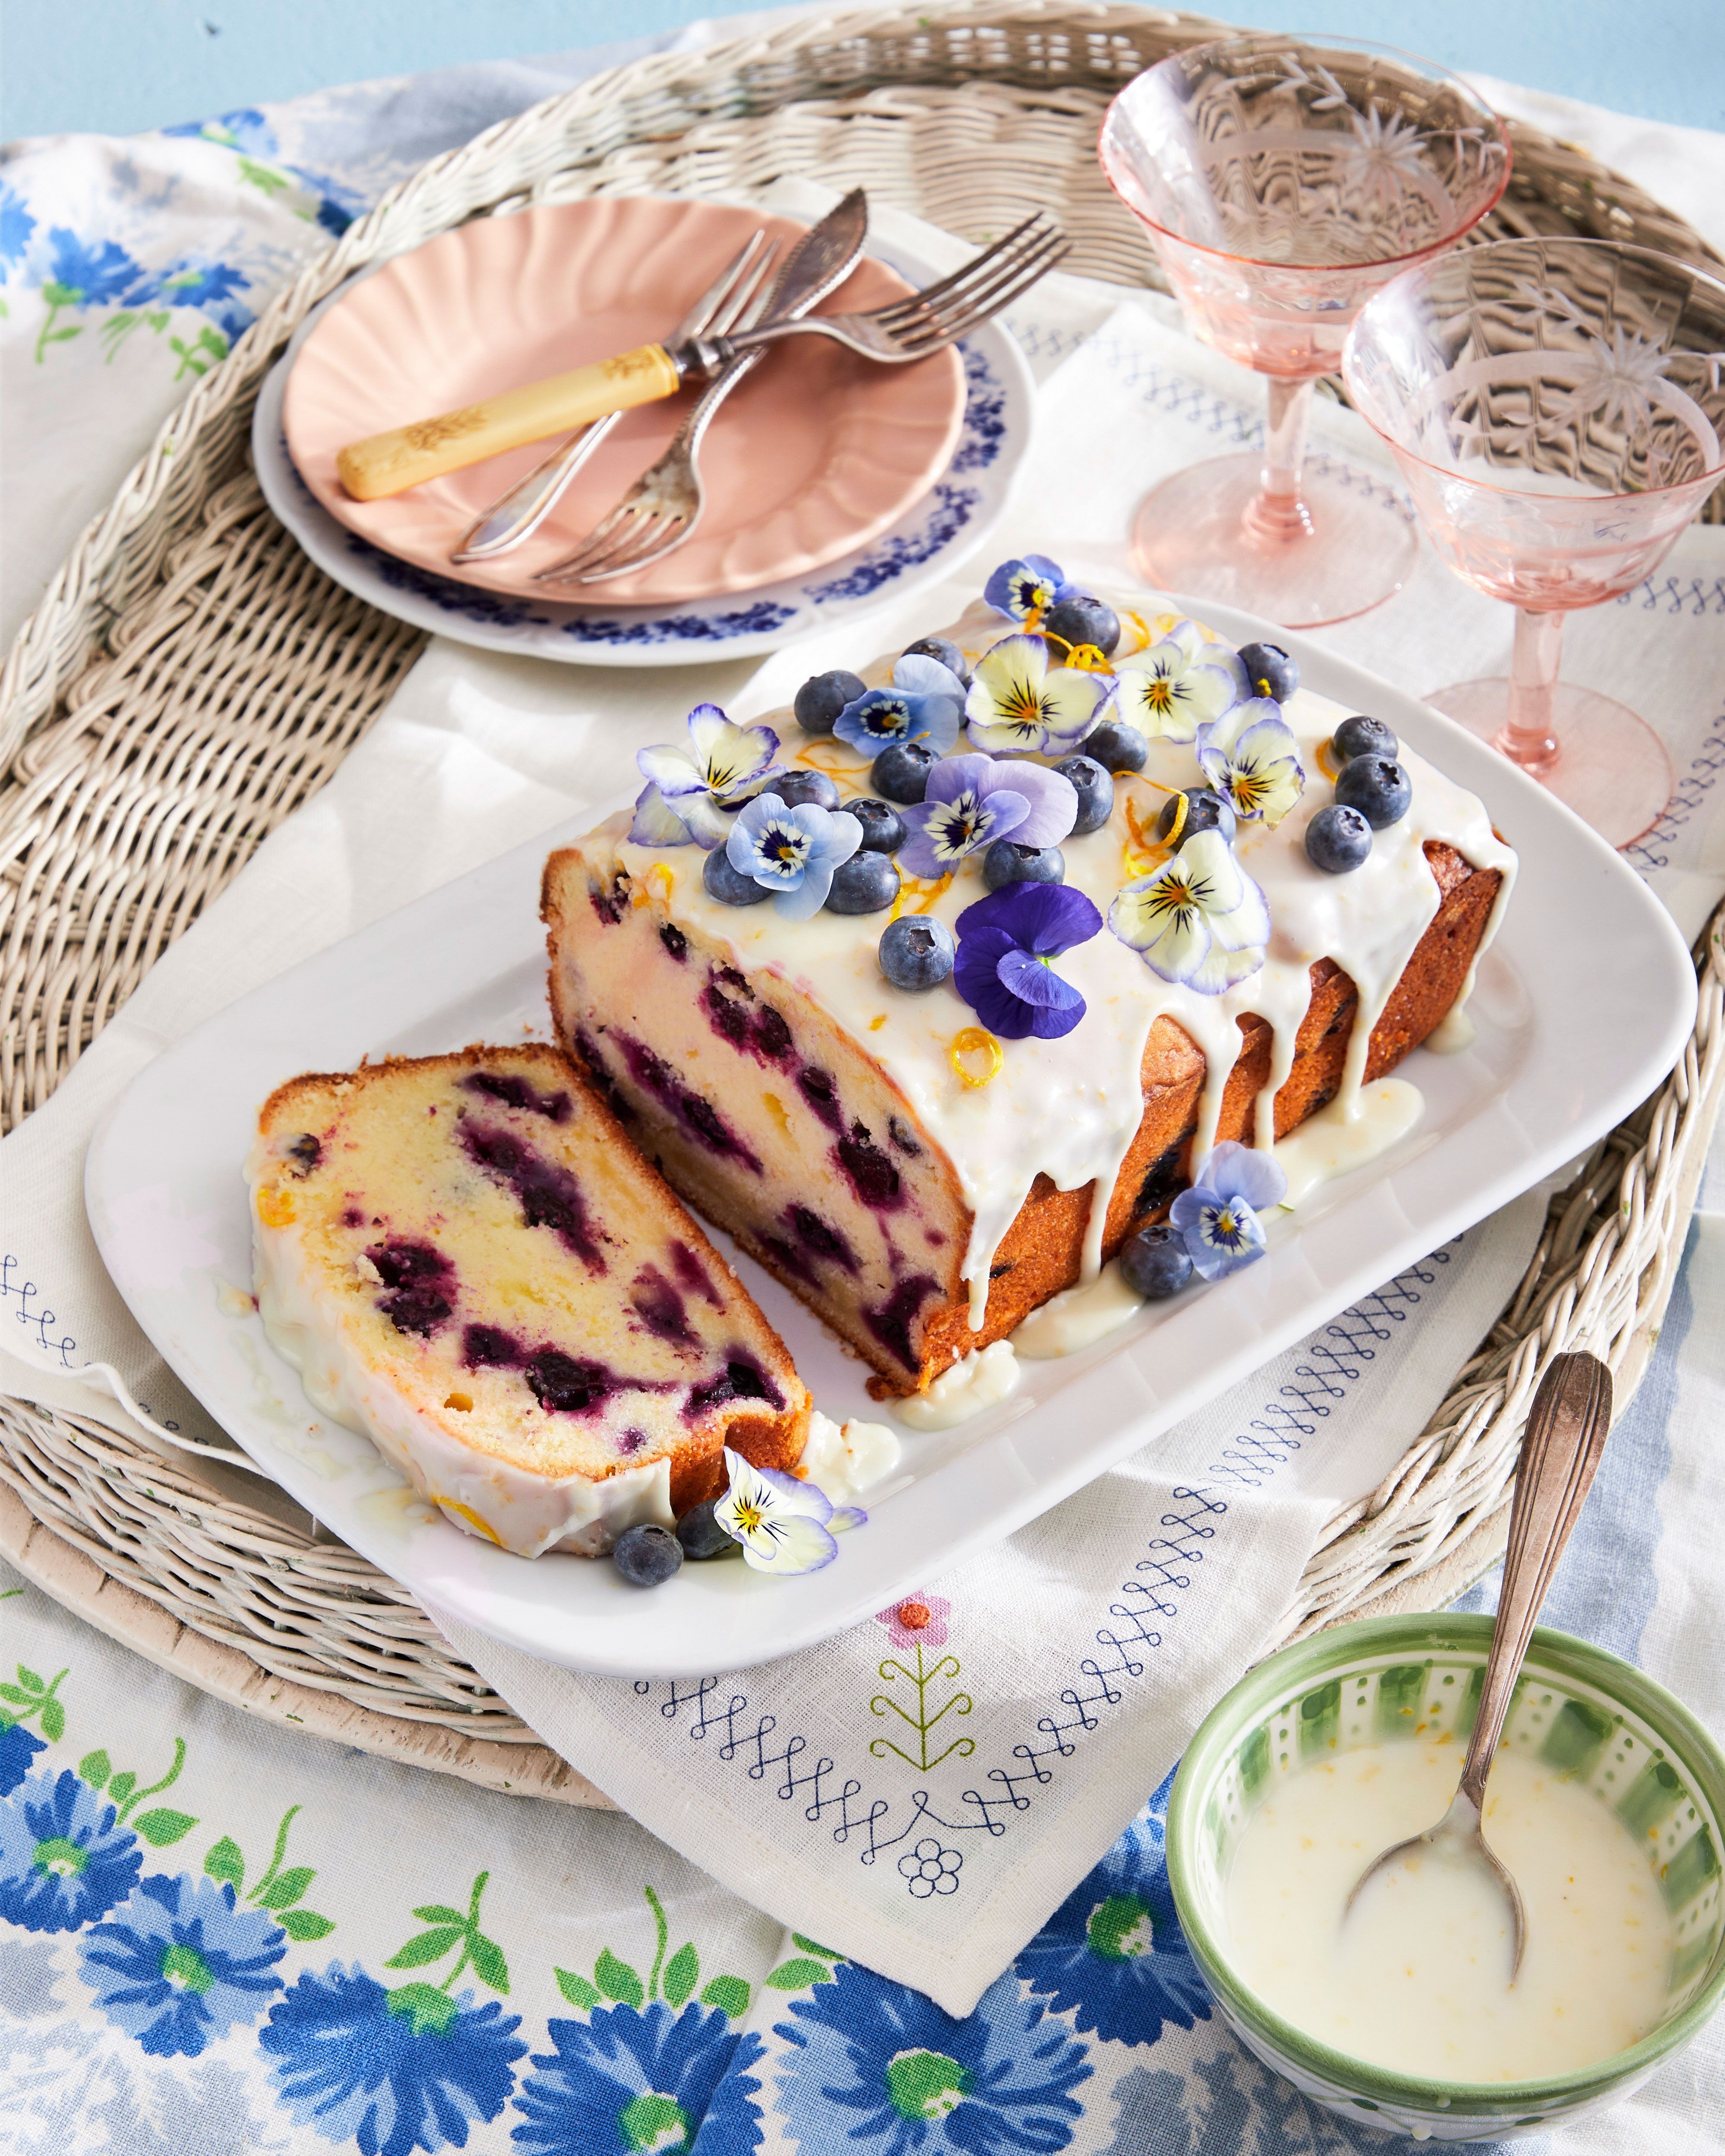 45 Best Mother's Day Cake Ideas - Parade